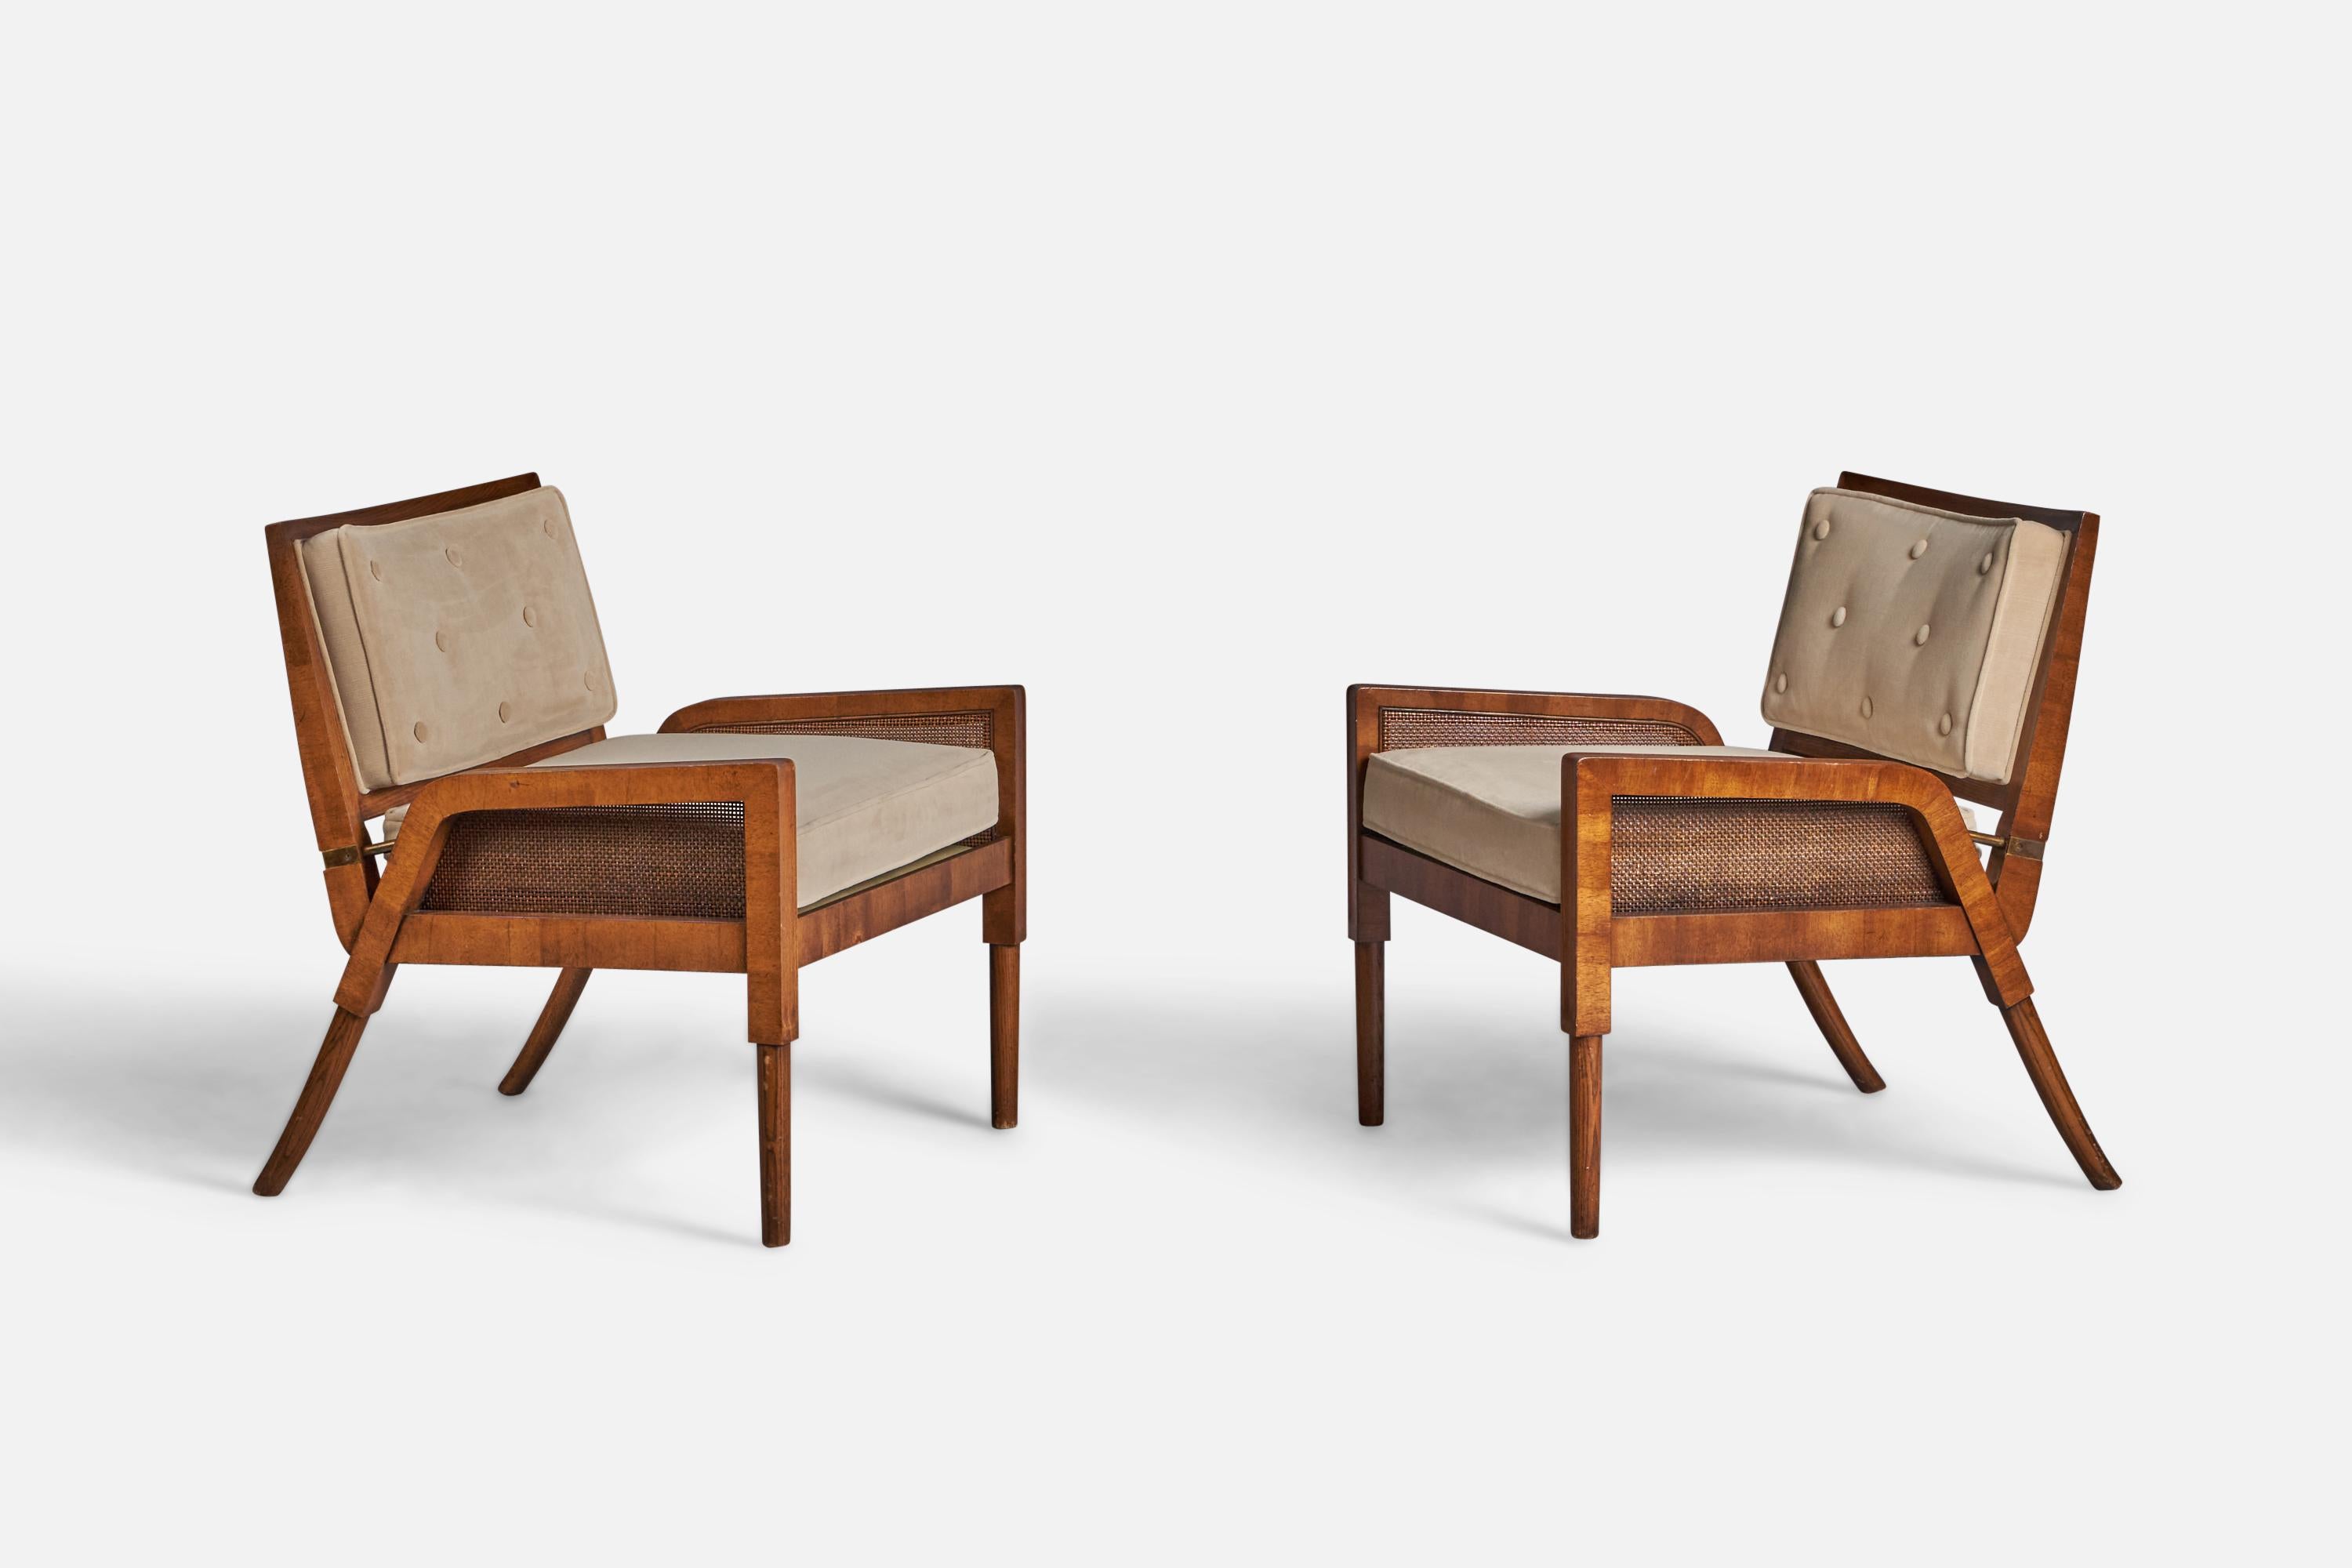 A pair of burl wood, beige fabric and cane lounge chairs designed and produced by Mastercraft, USA, c. 1950s.

17” seat height